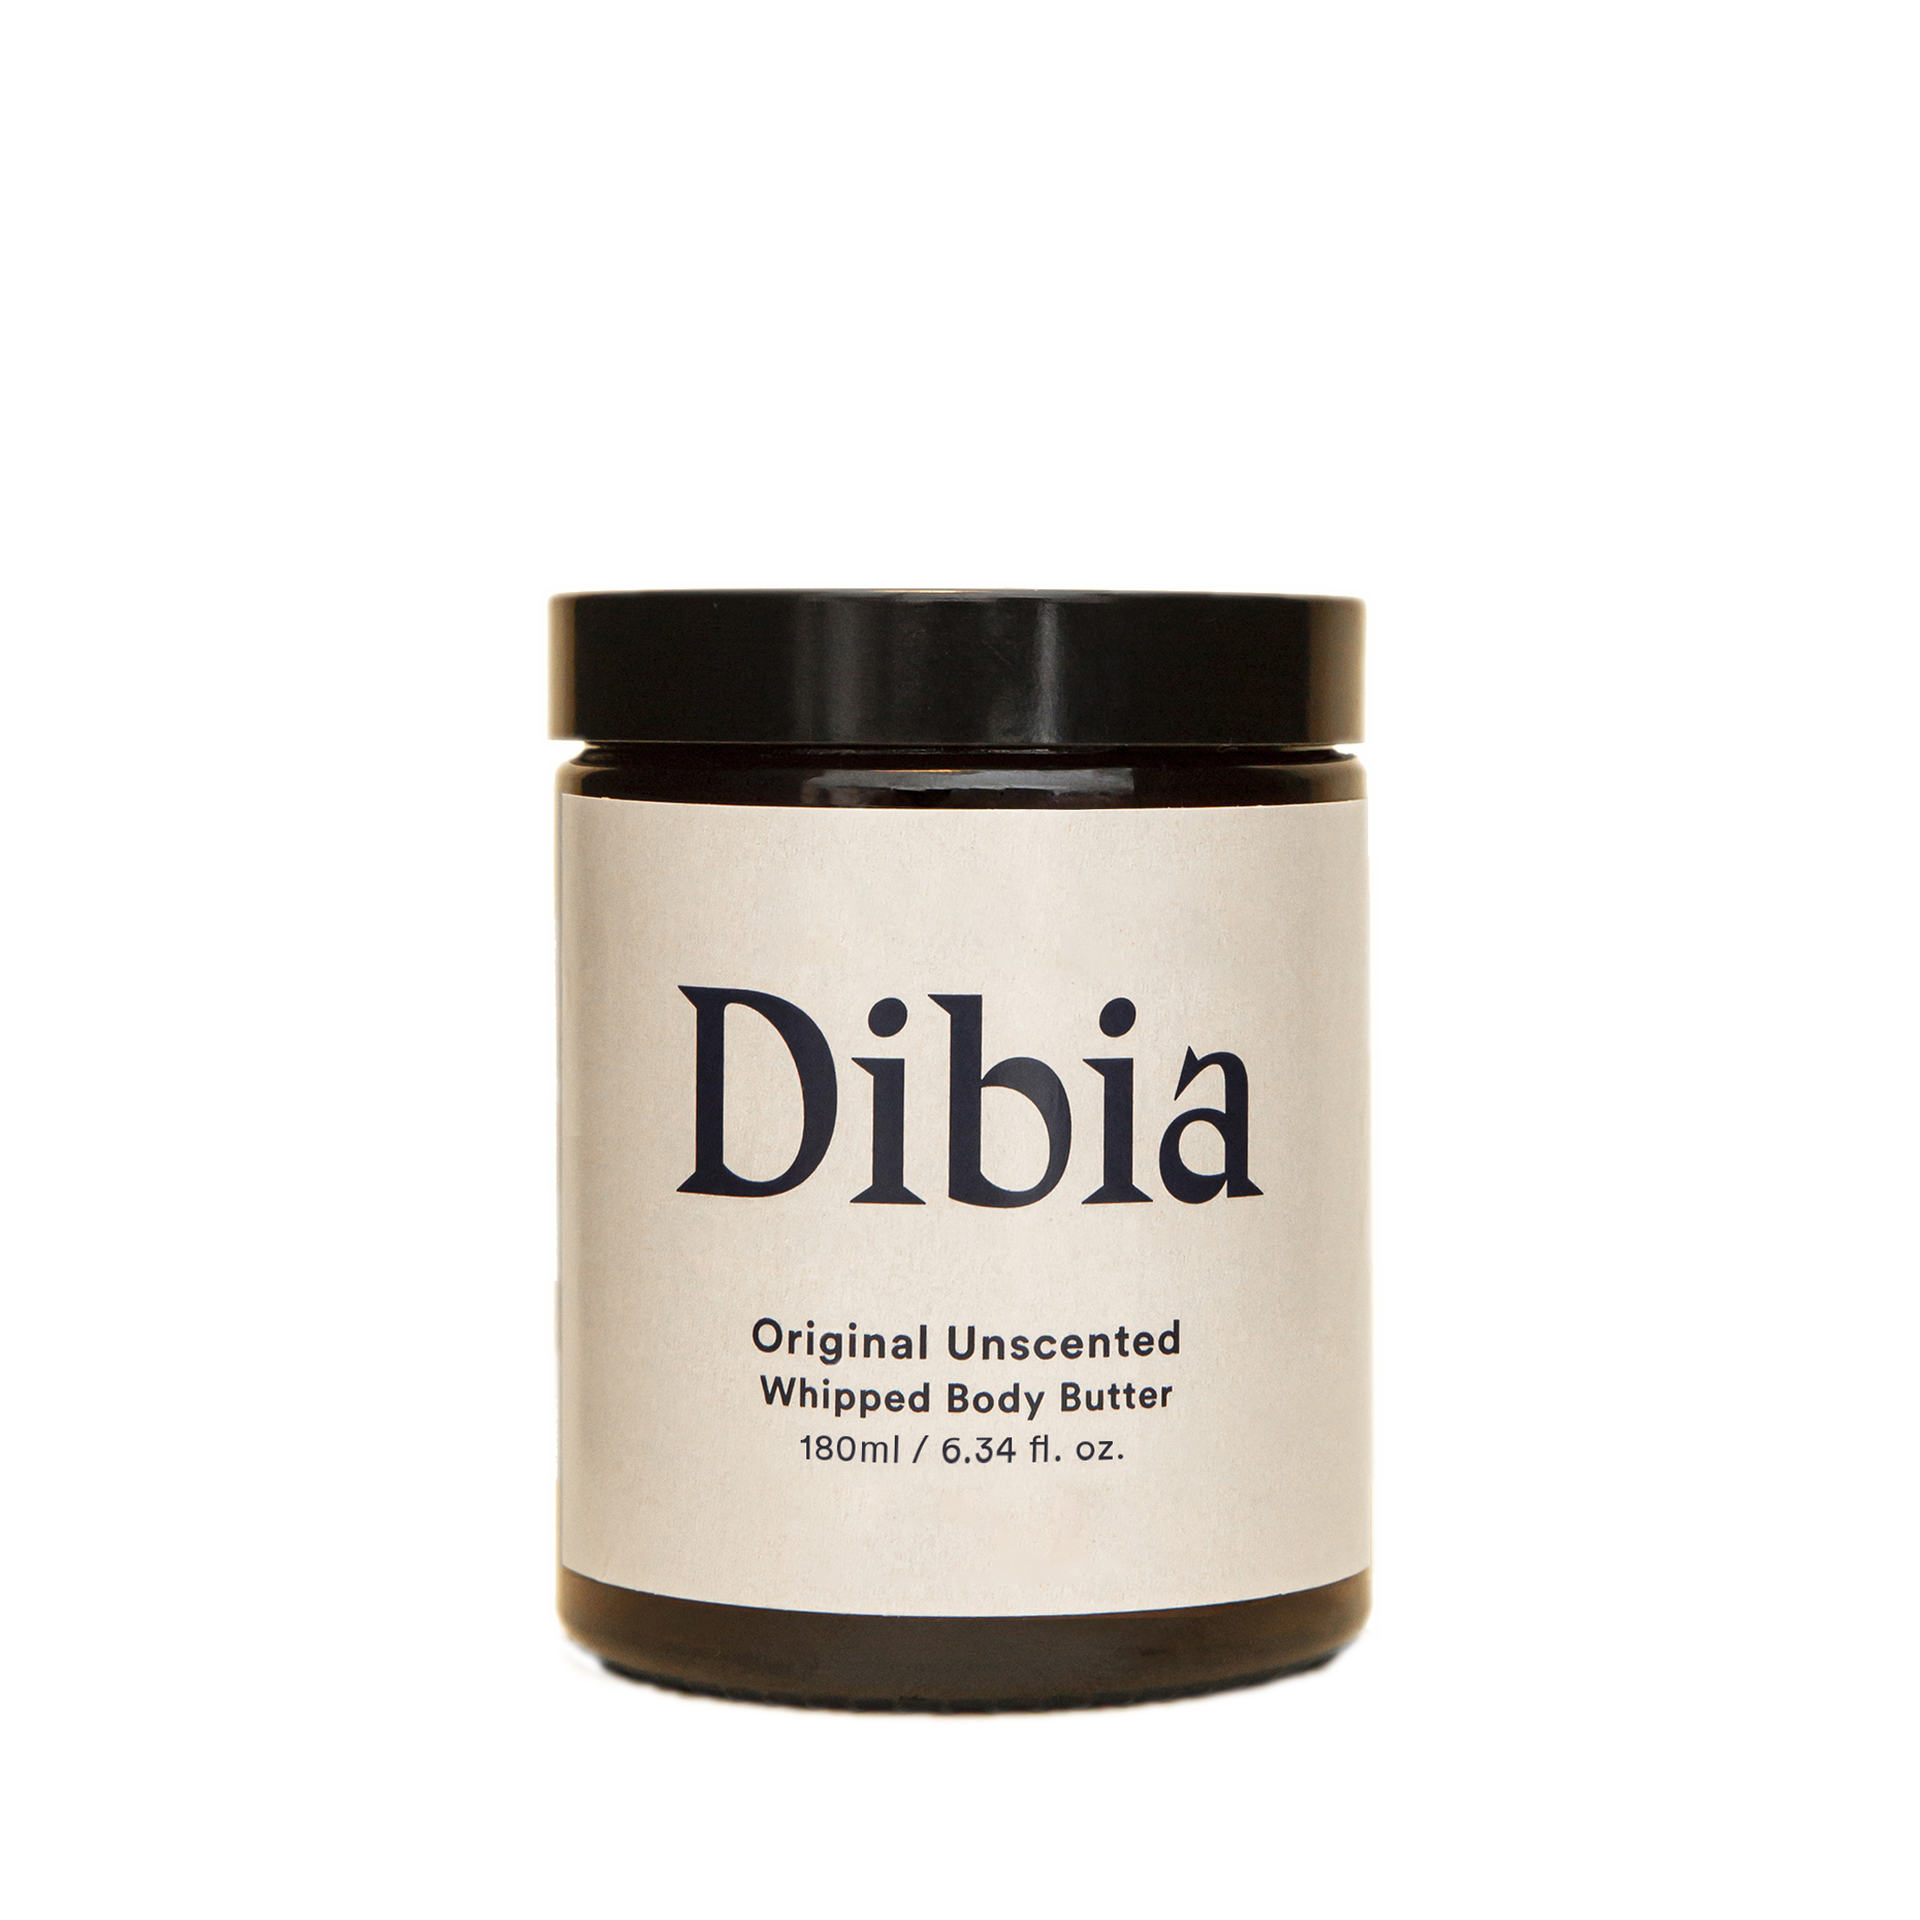 DIBIA - ORIGINAL UNSCENTED WHIPPED BODY BUTTER